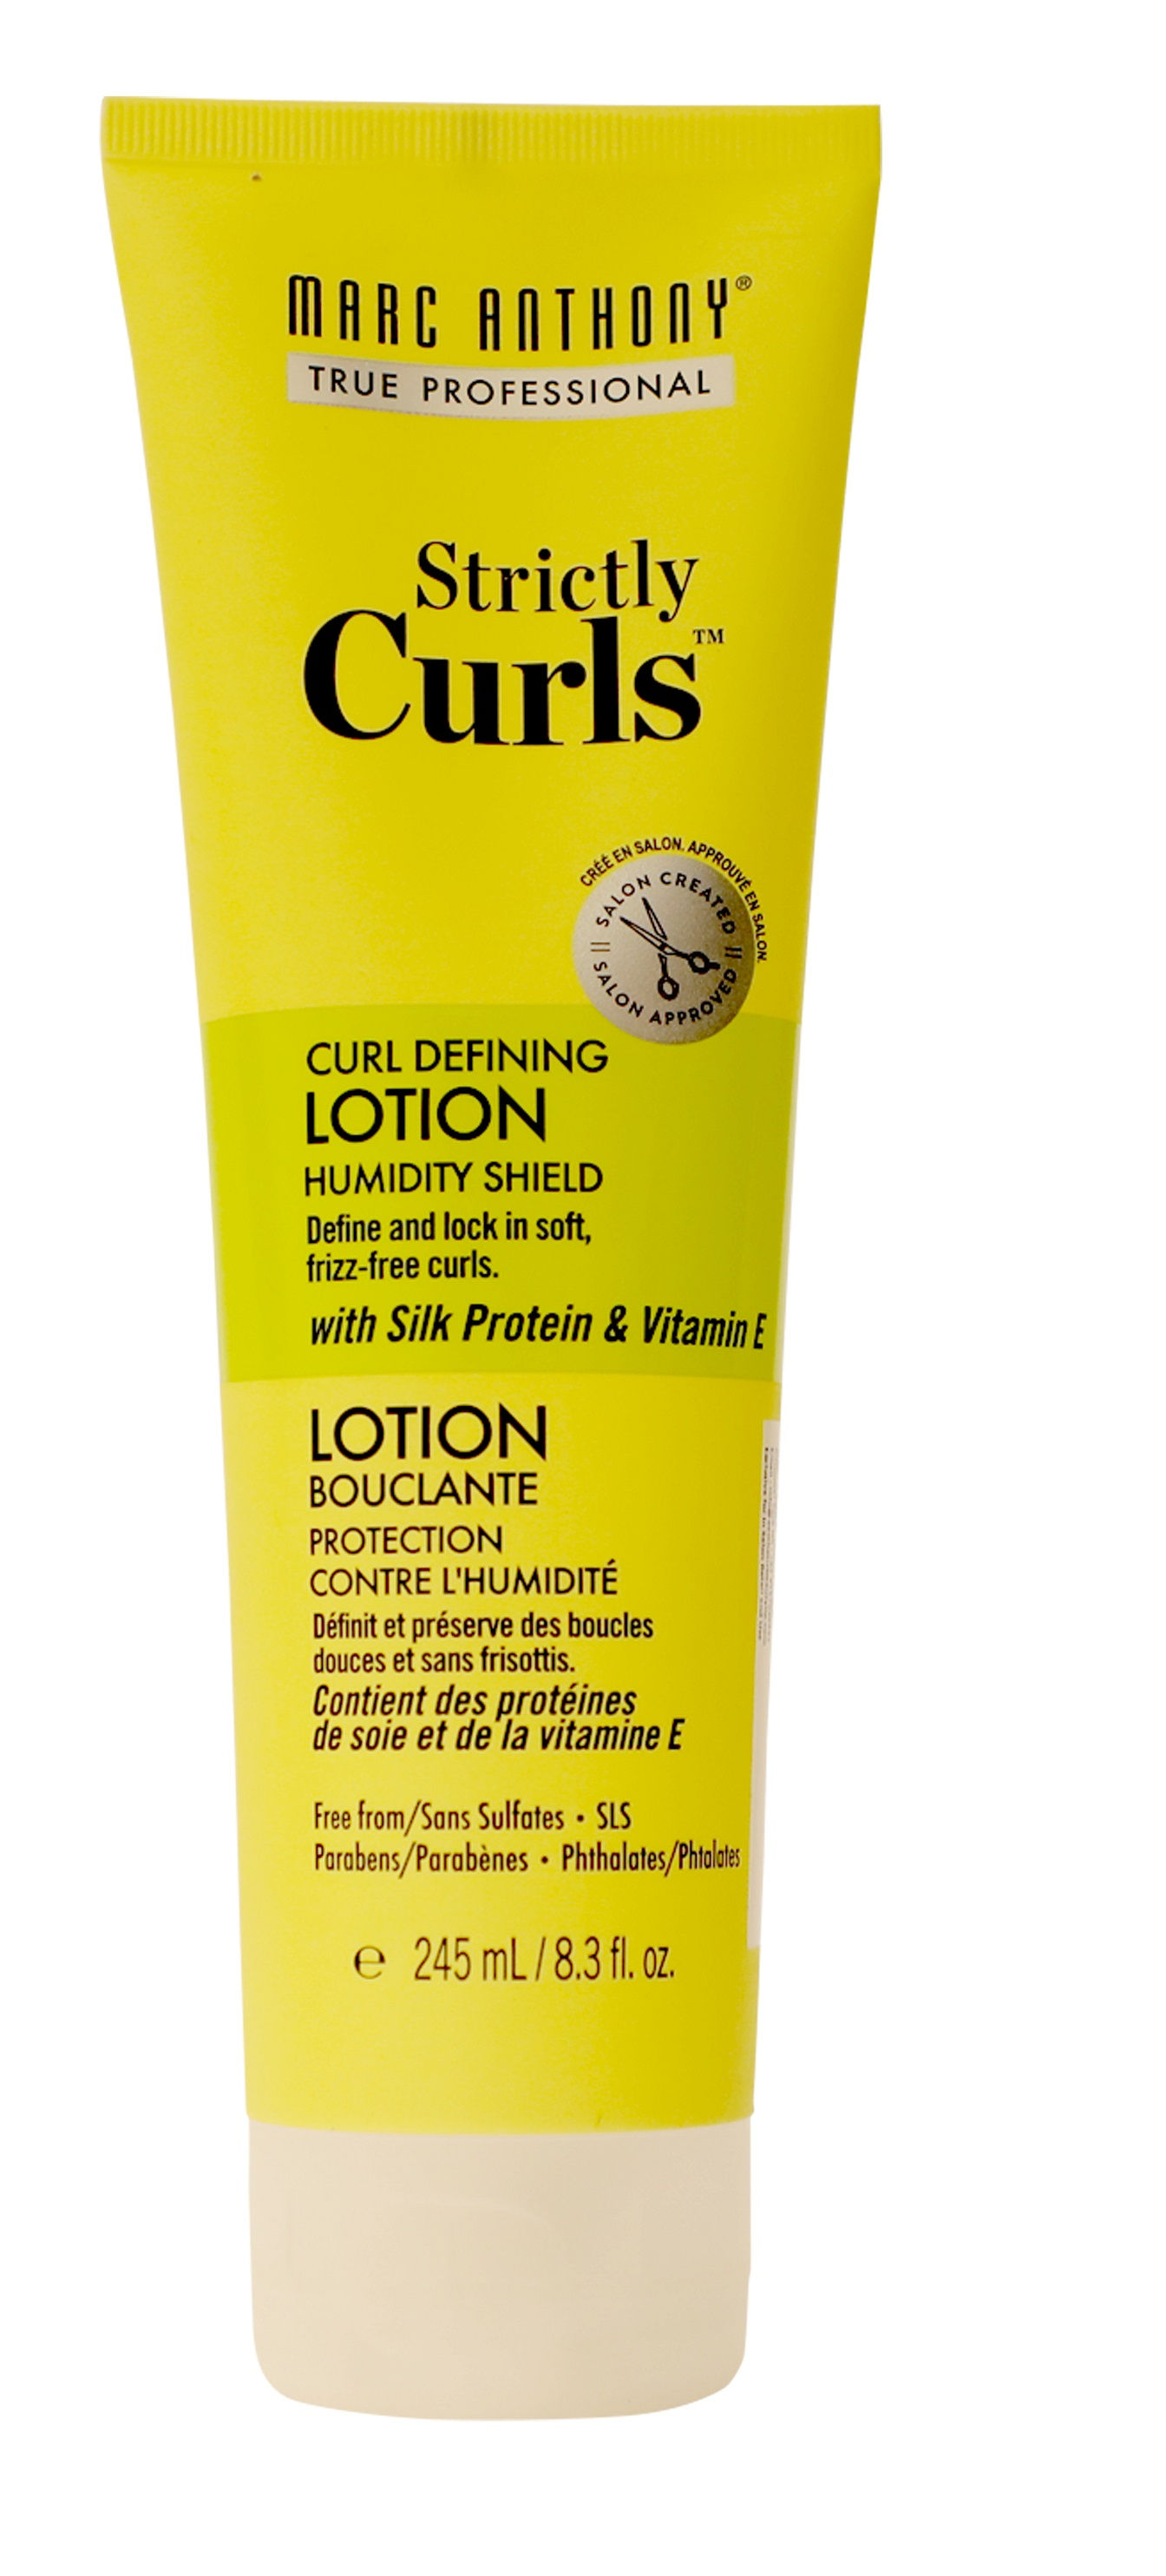 Marc Anthony Strictly Curls Curl Defining Styling Lotion